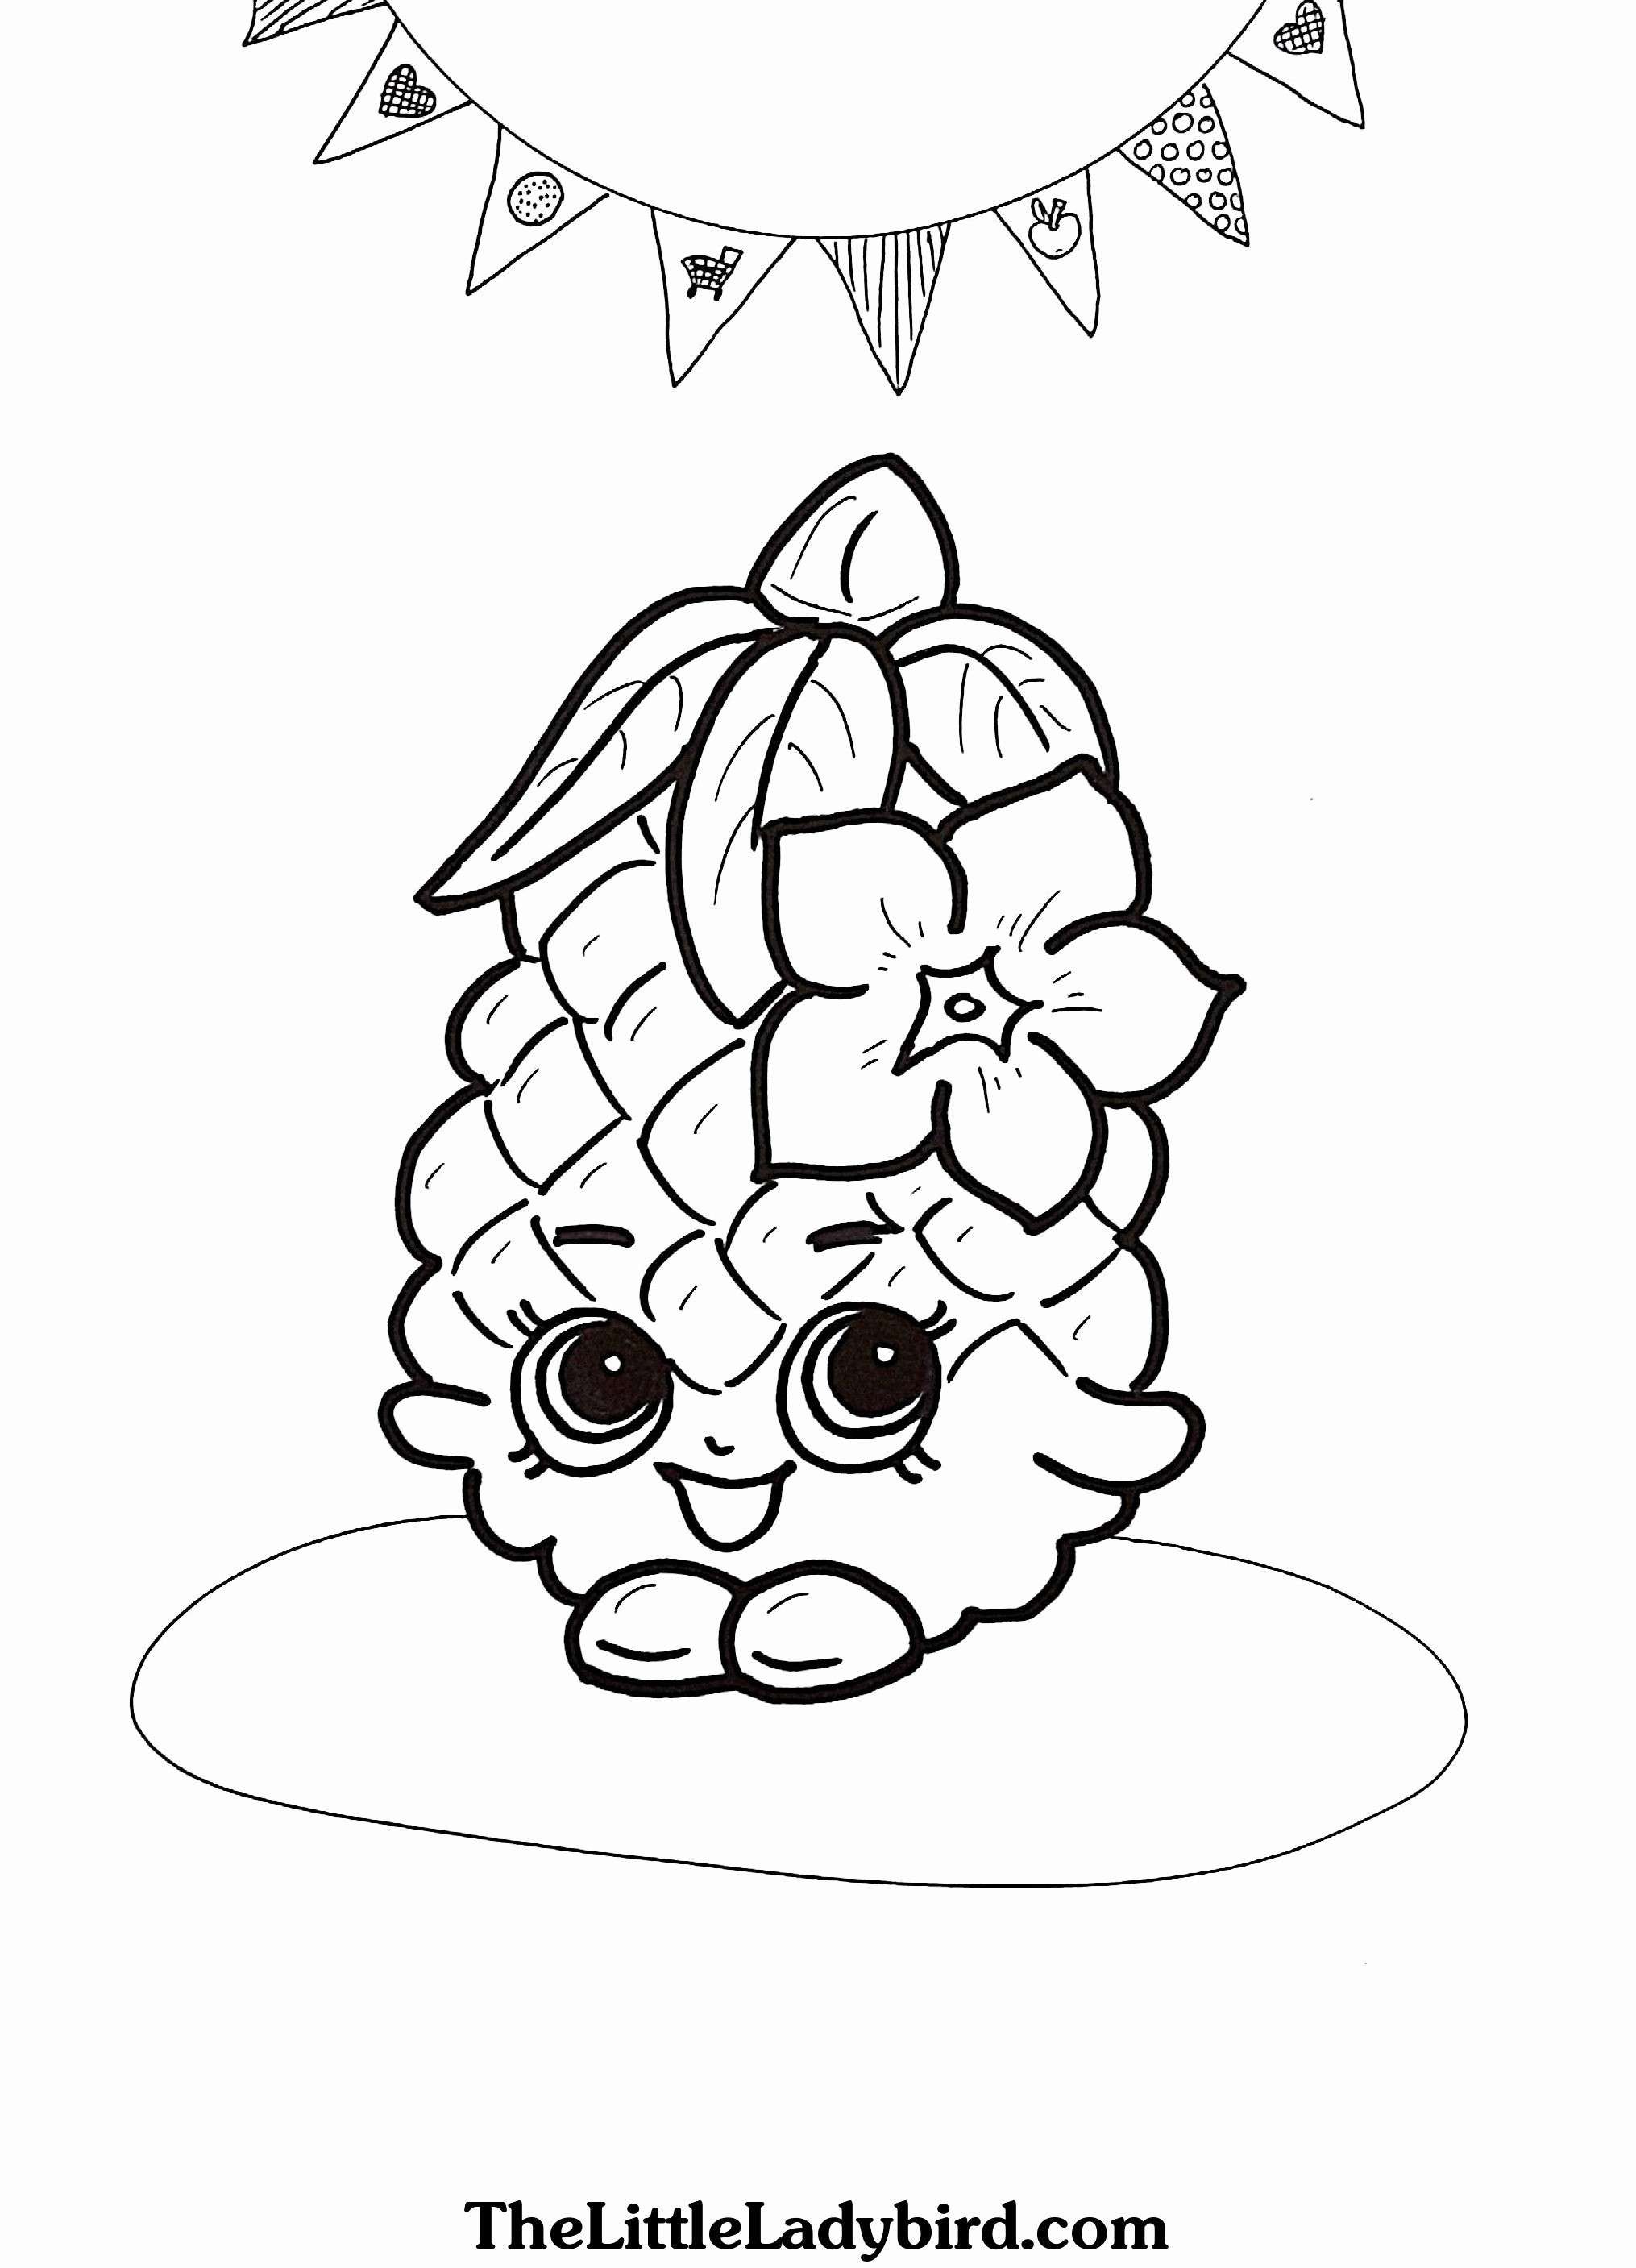 Car Coloring Pages New Cool Coloring Page Unique Witch Coloring Pages New Crayola Pages 0d